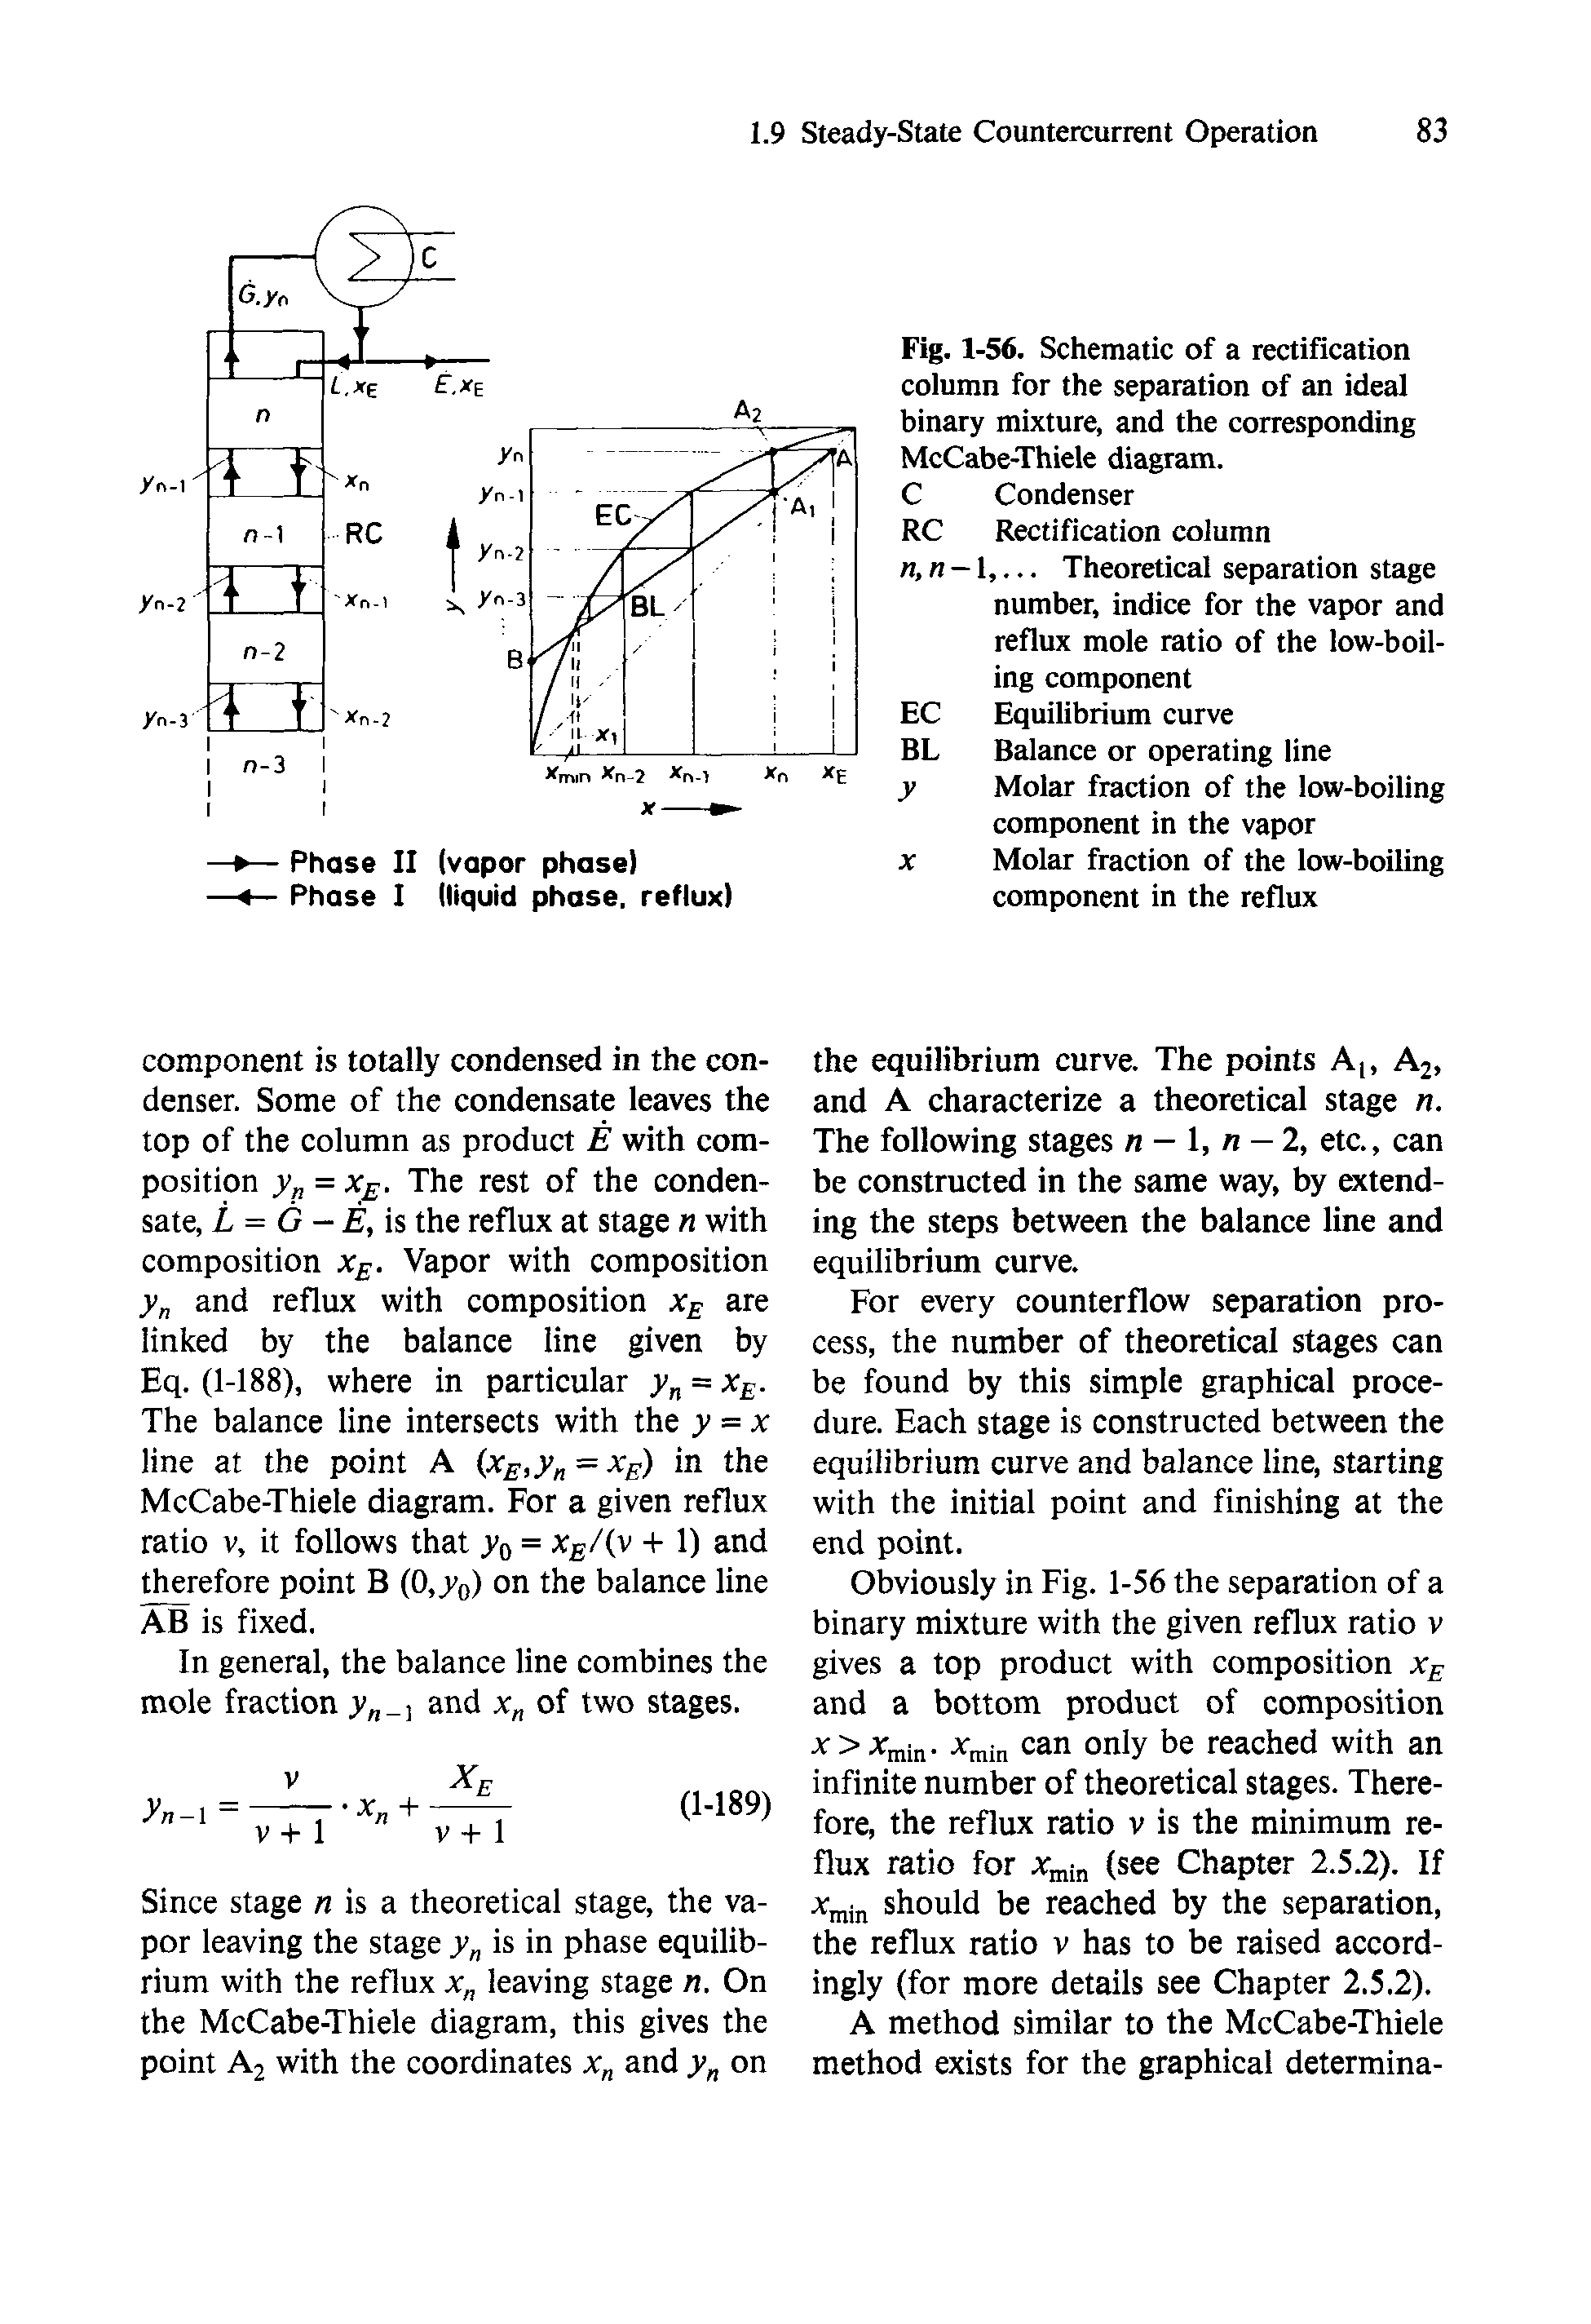 Fig. 1-56. Scliematic of a rectification column for the separation of an ideal binary mixture, and the corresponding McCabe-Thiele diagram.